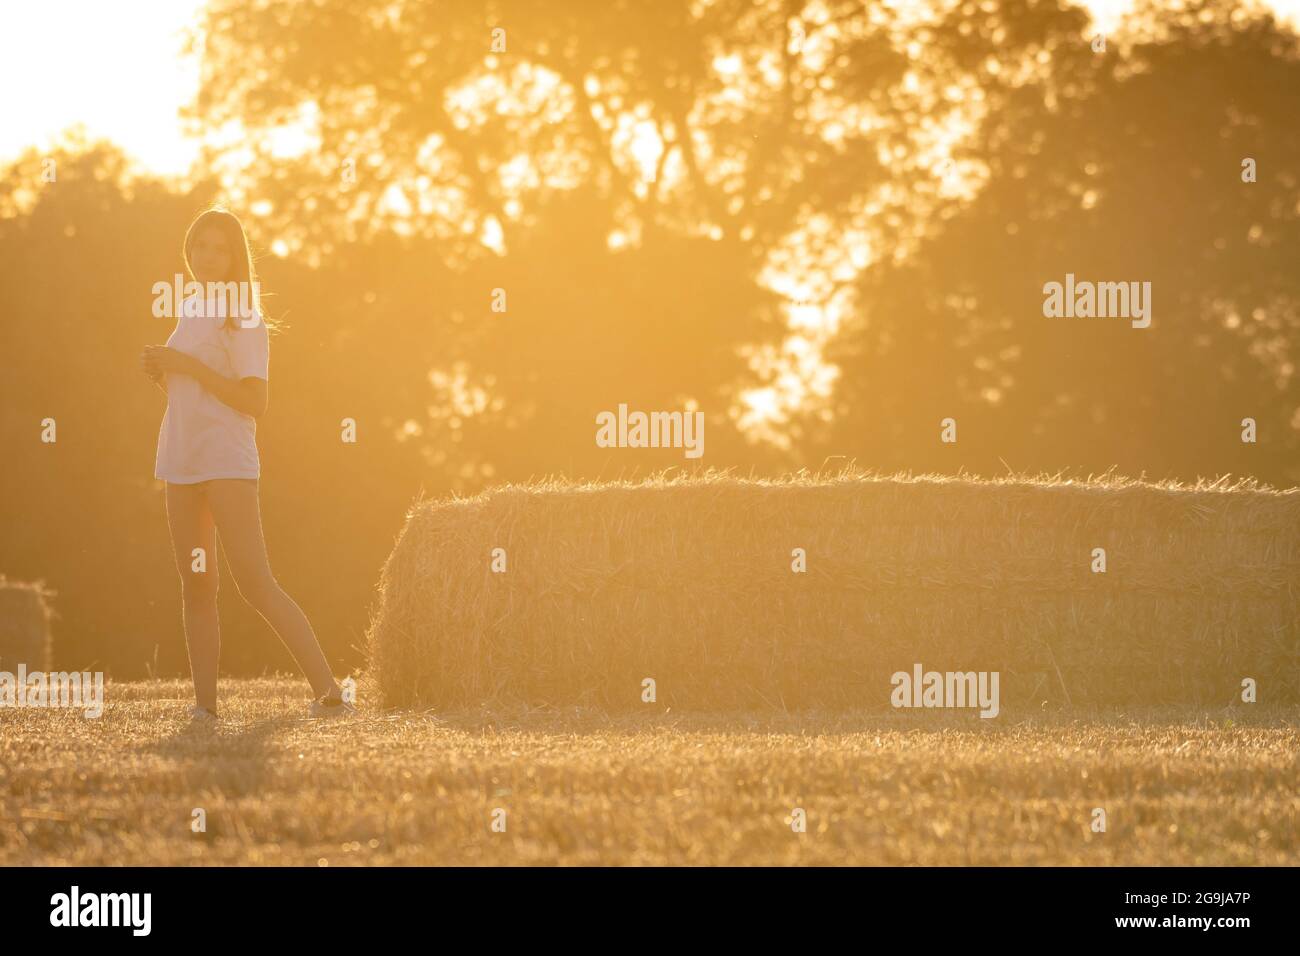 Teenage girl with long blonde hair wearing shorts and white t-shirt posing standing in a field with straw bales. Warm atmosphere due to the falling su Stock Photo